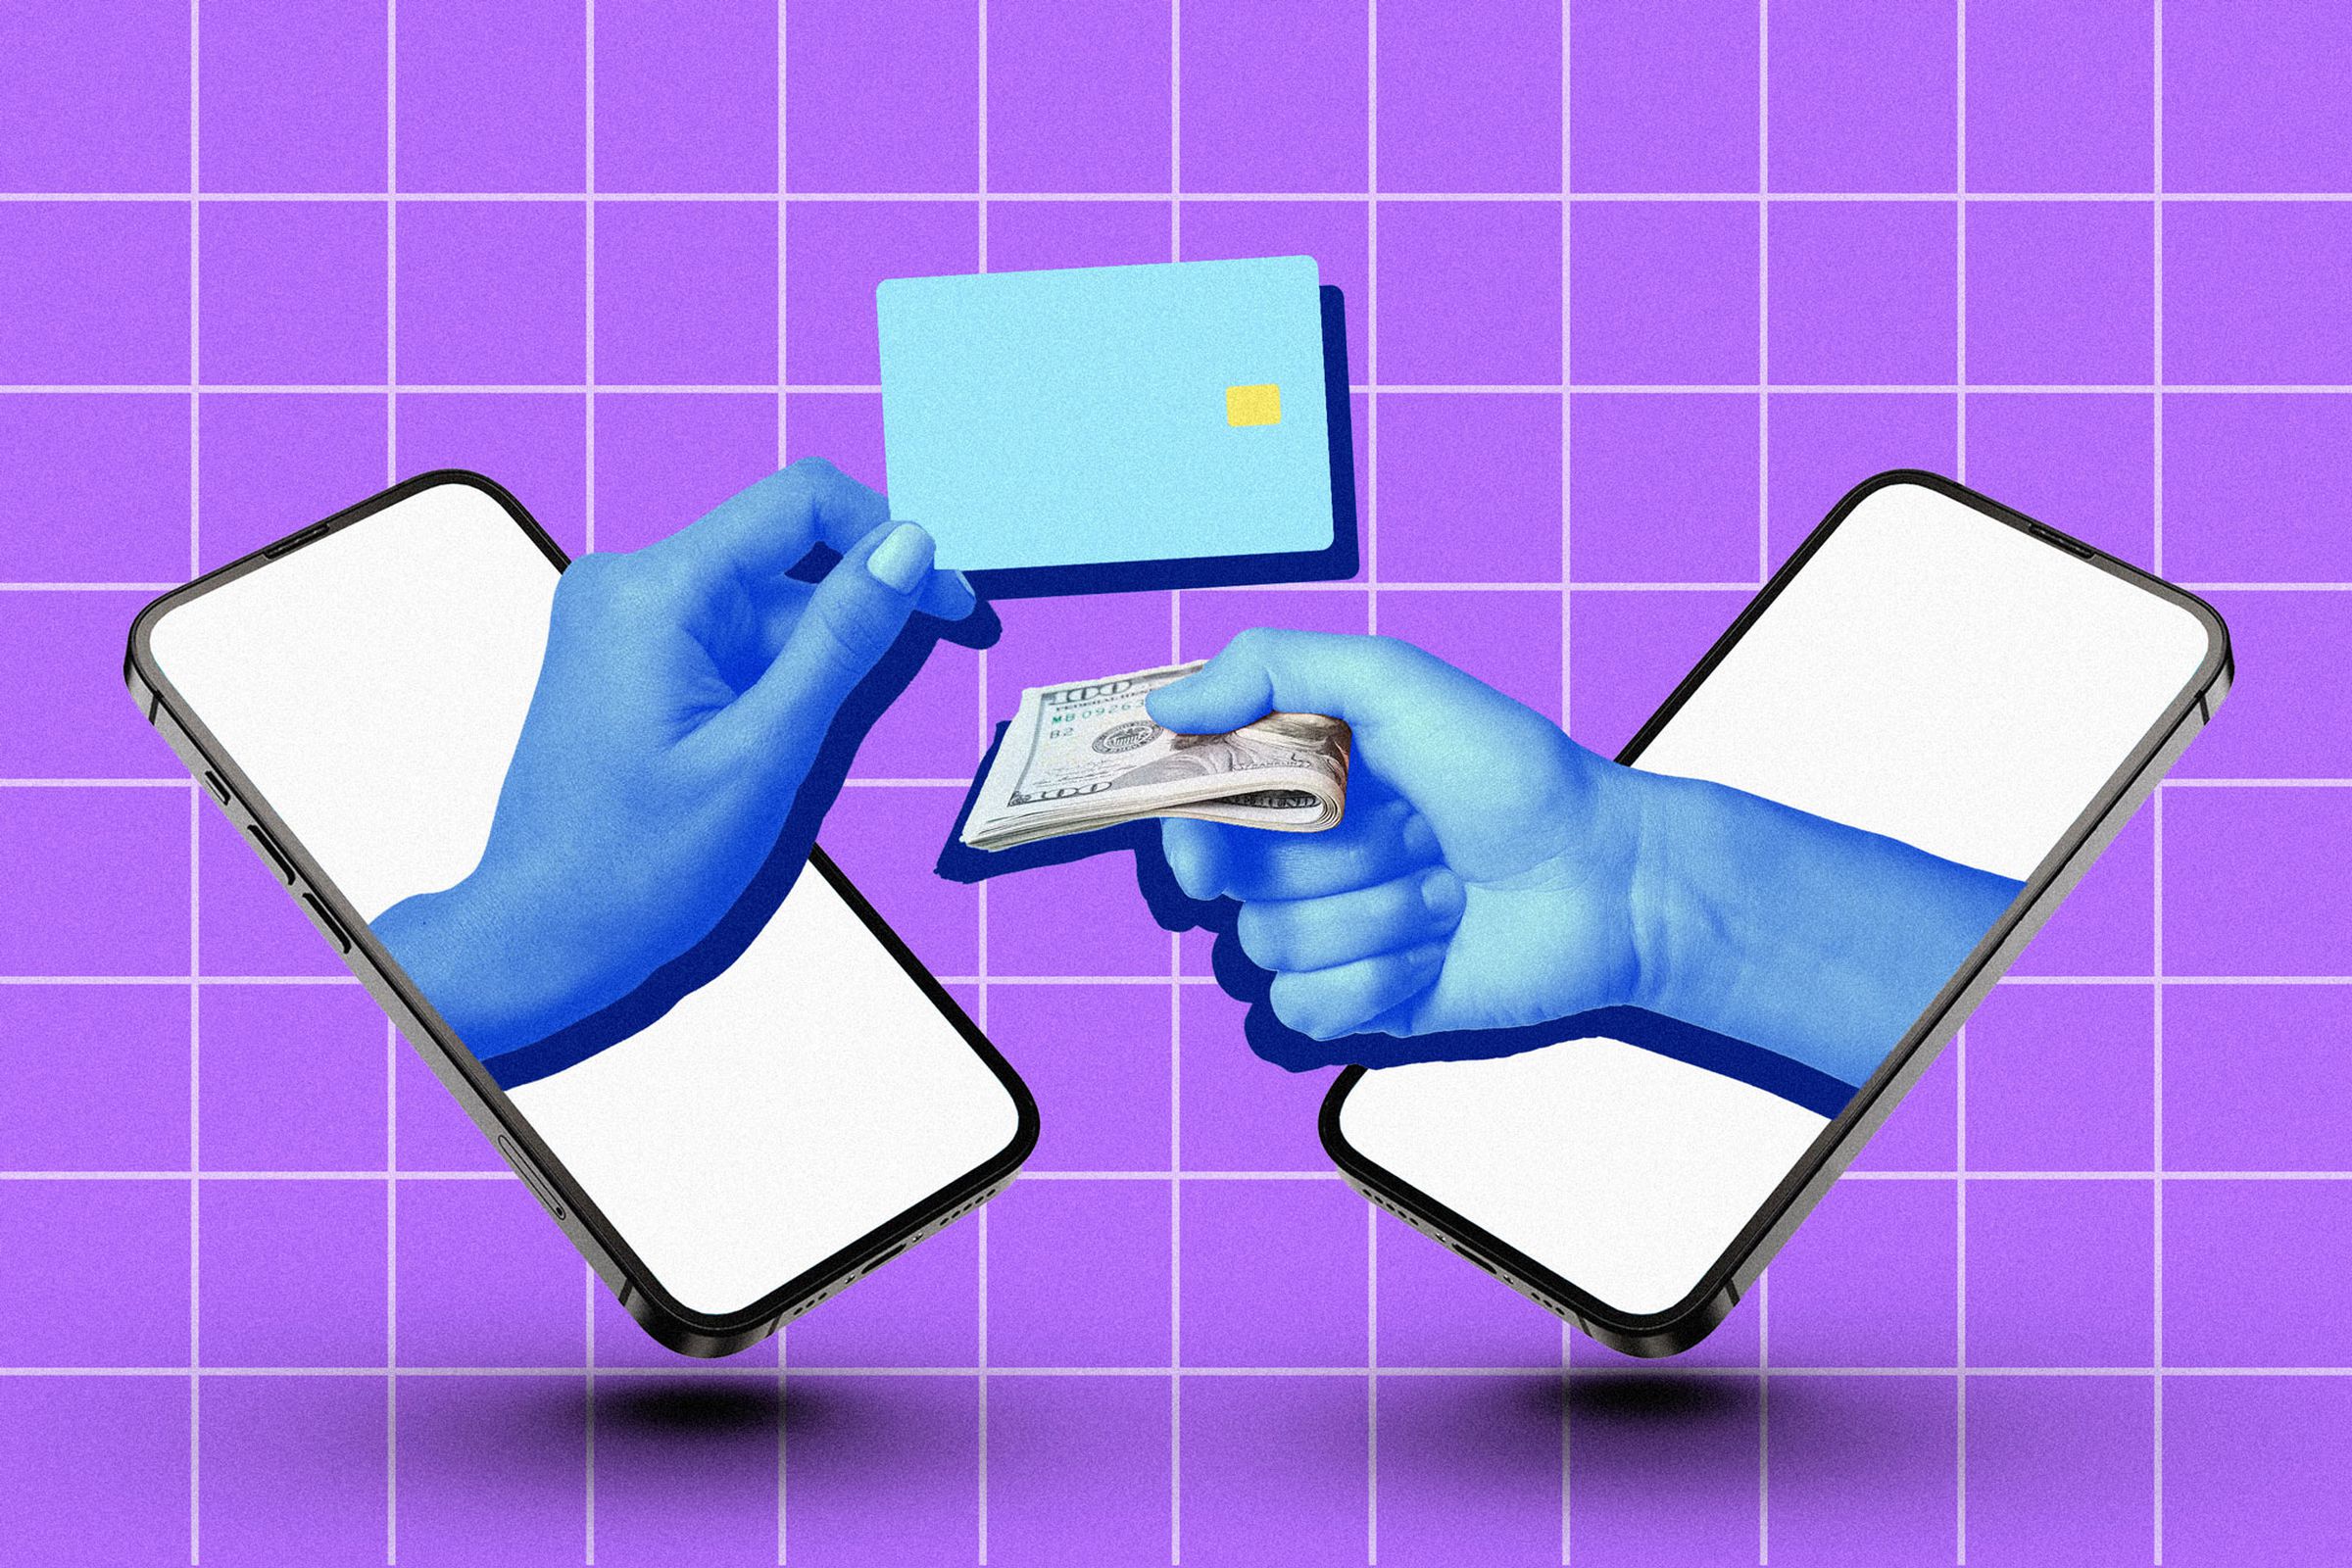 An illustration of two hands emerging from phones, one holding a credit card and one holding cash.